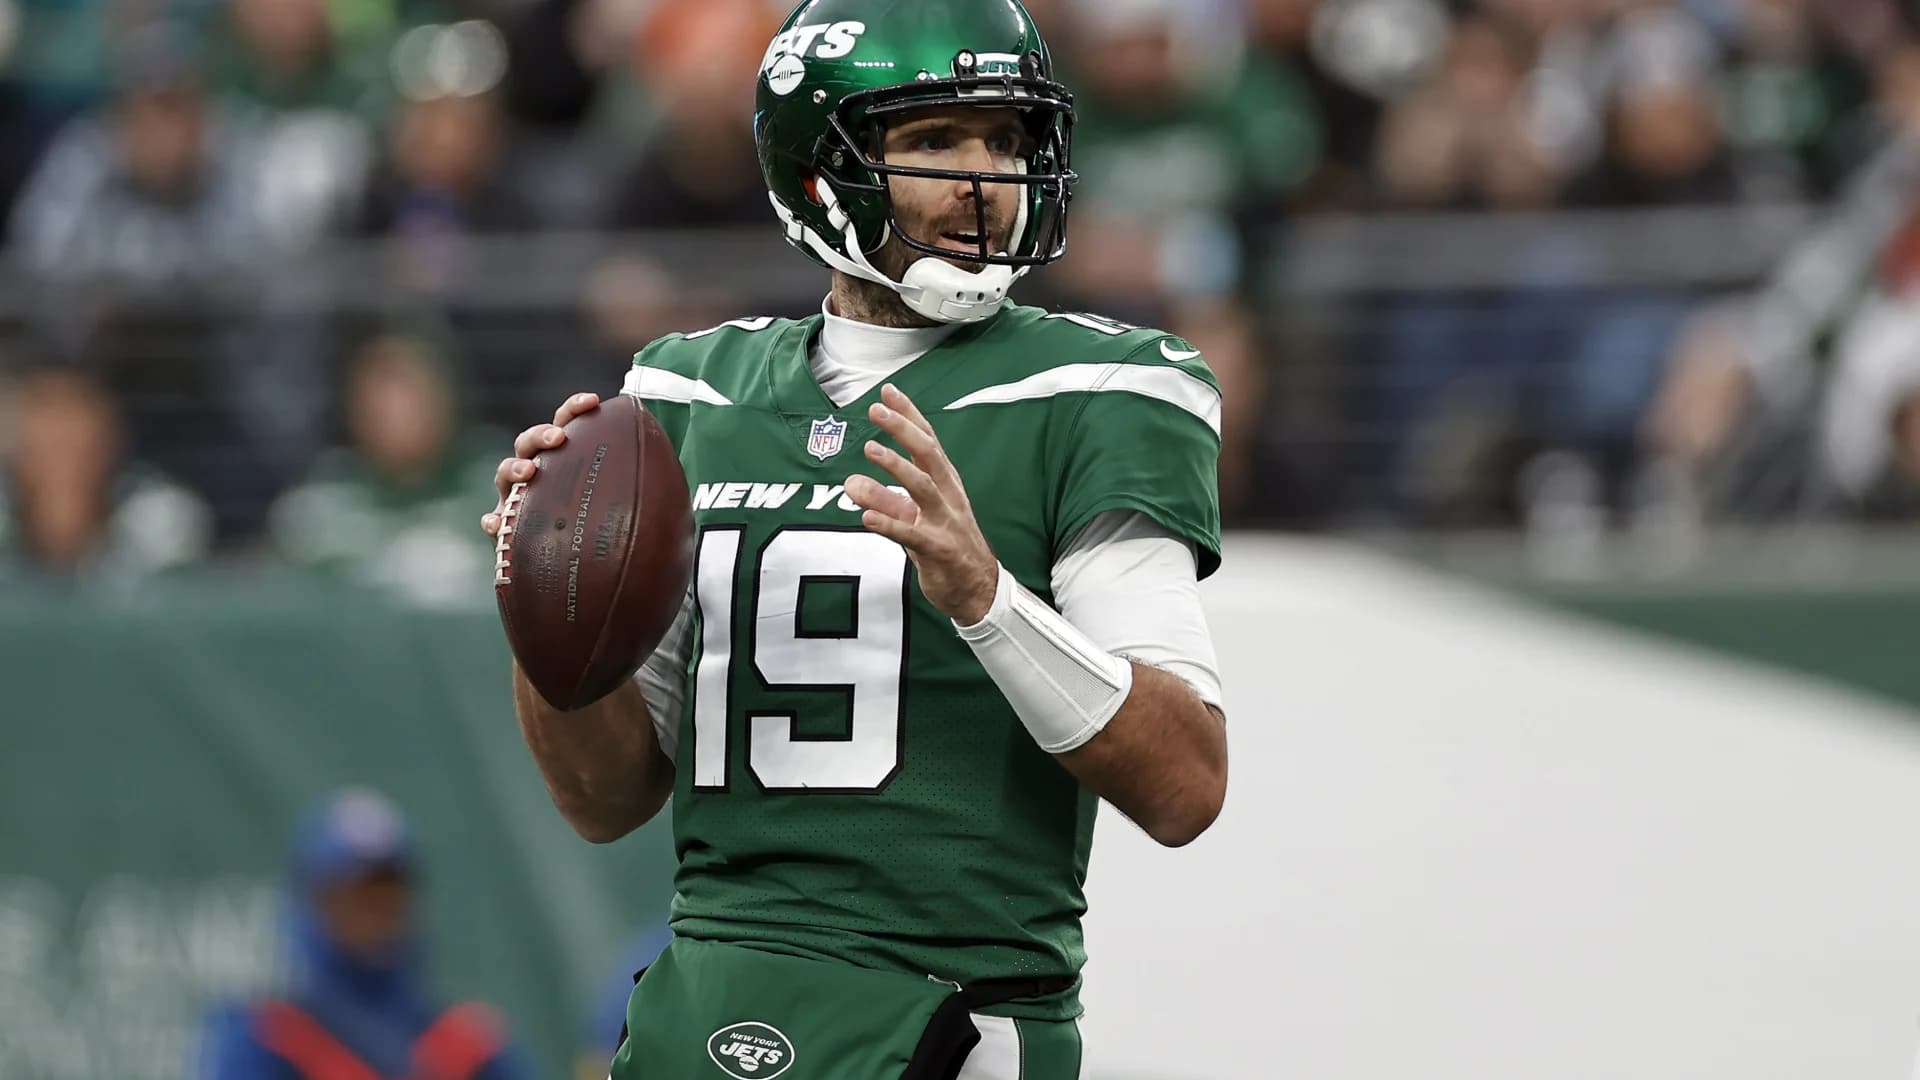 Jets bringing back QBs Joe Flacco, Mike White as Zach Wilson's backups